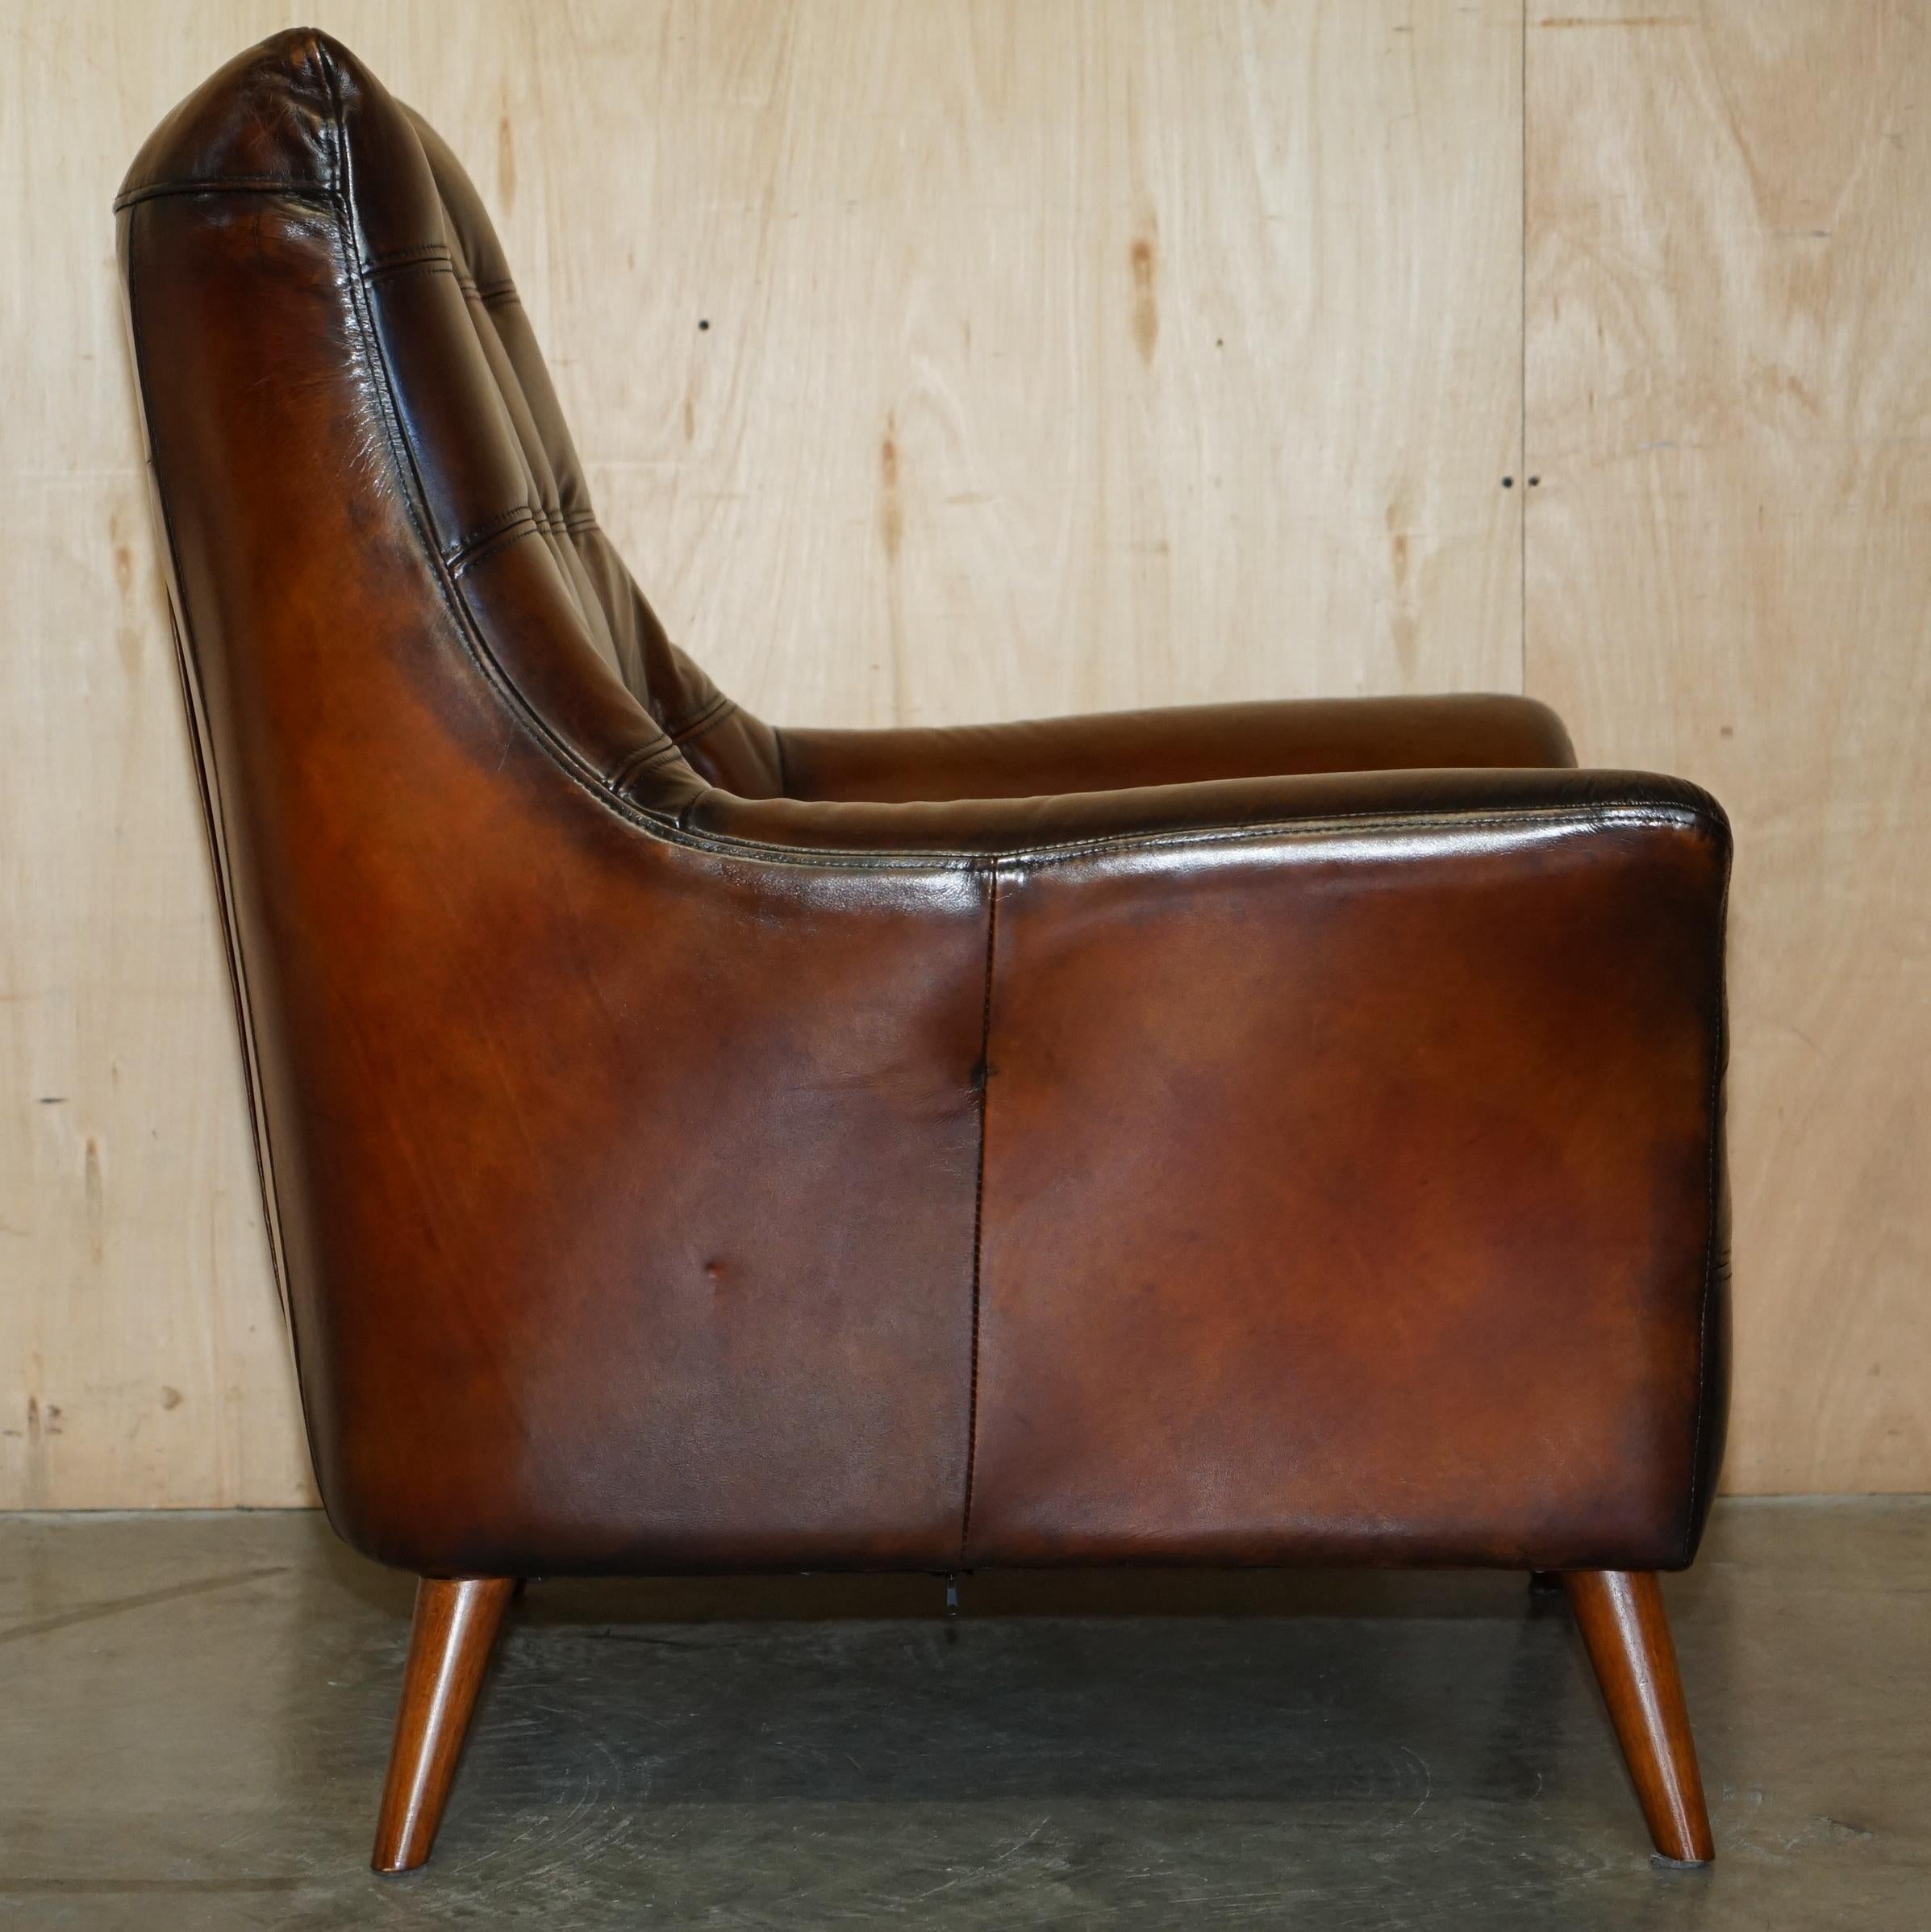 PAIR OF FULLY RESTORED HAND DYED CHESTERFiELD WHISKY BROWN LEATHER ARMCHAIRS For Sale 12